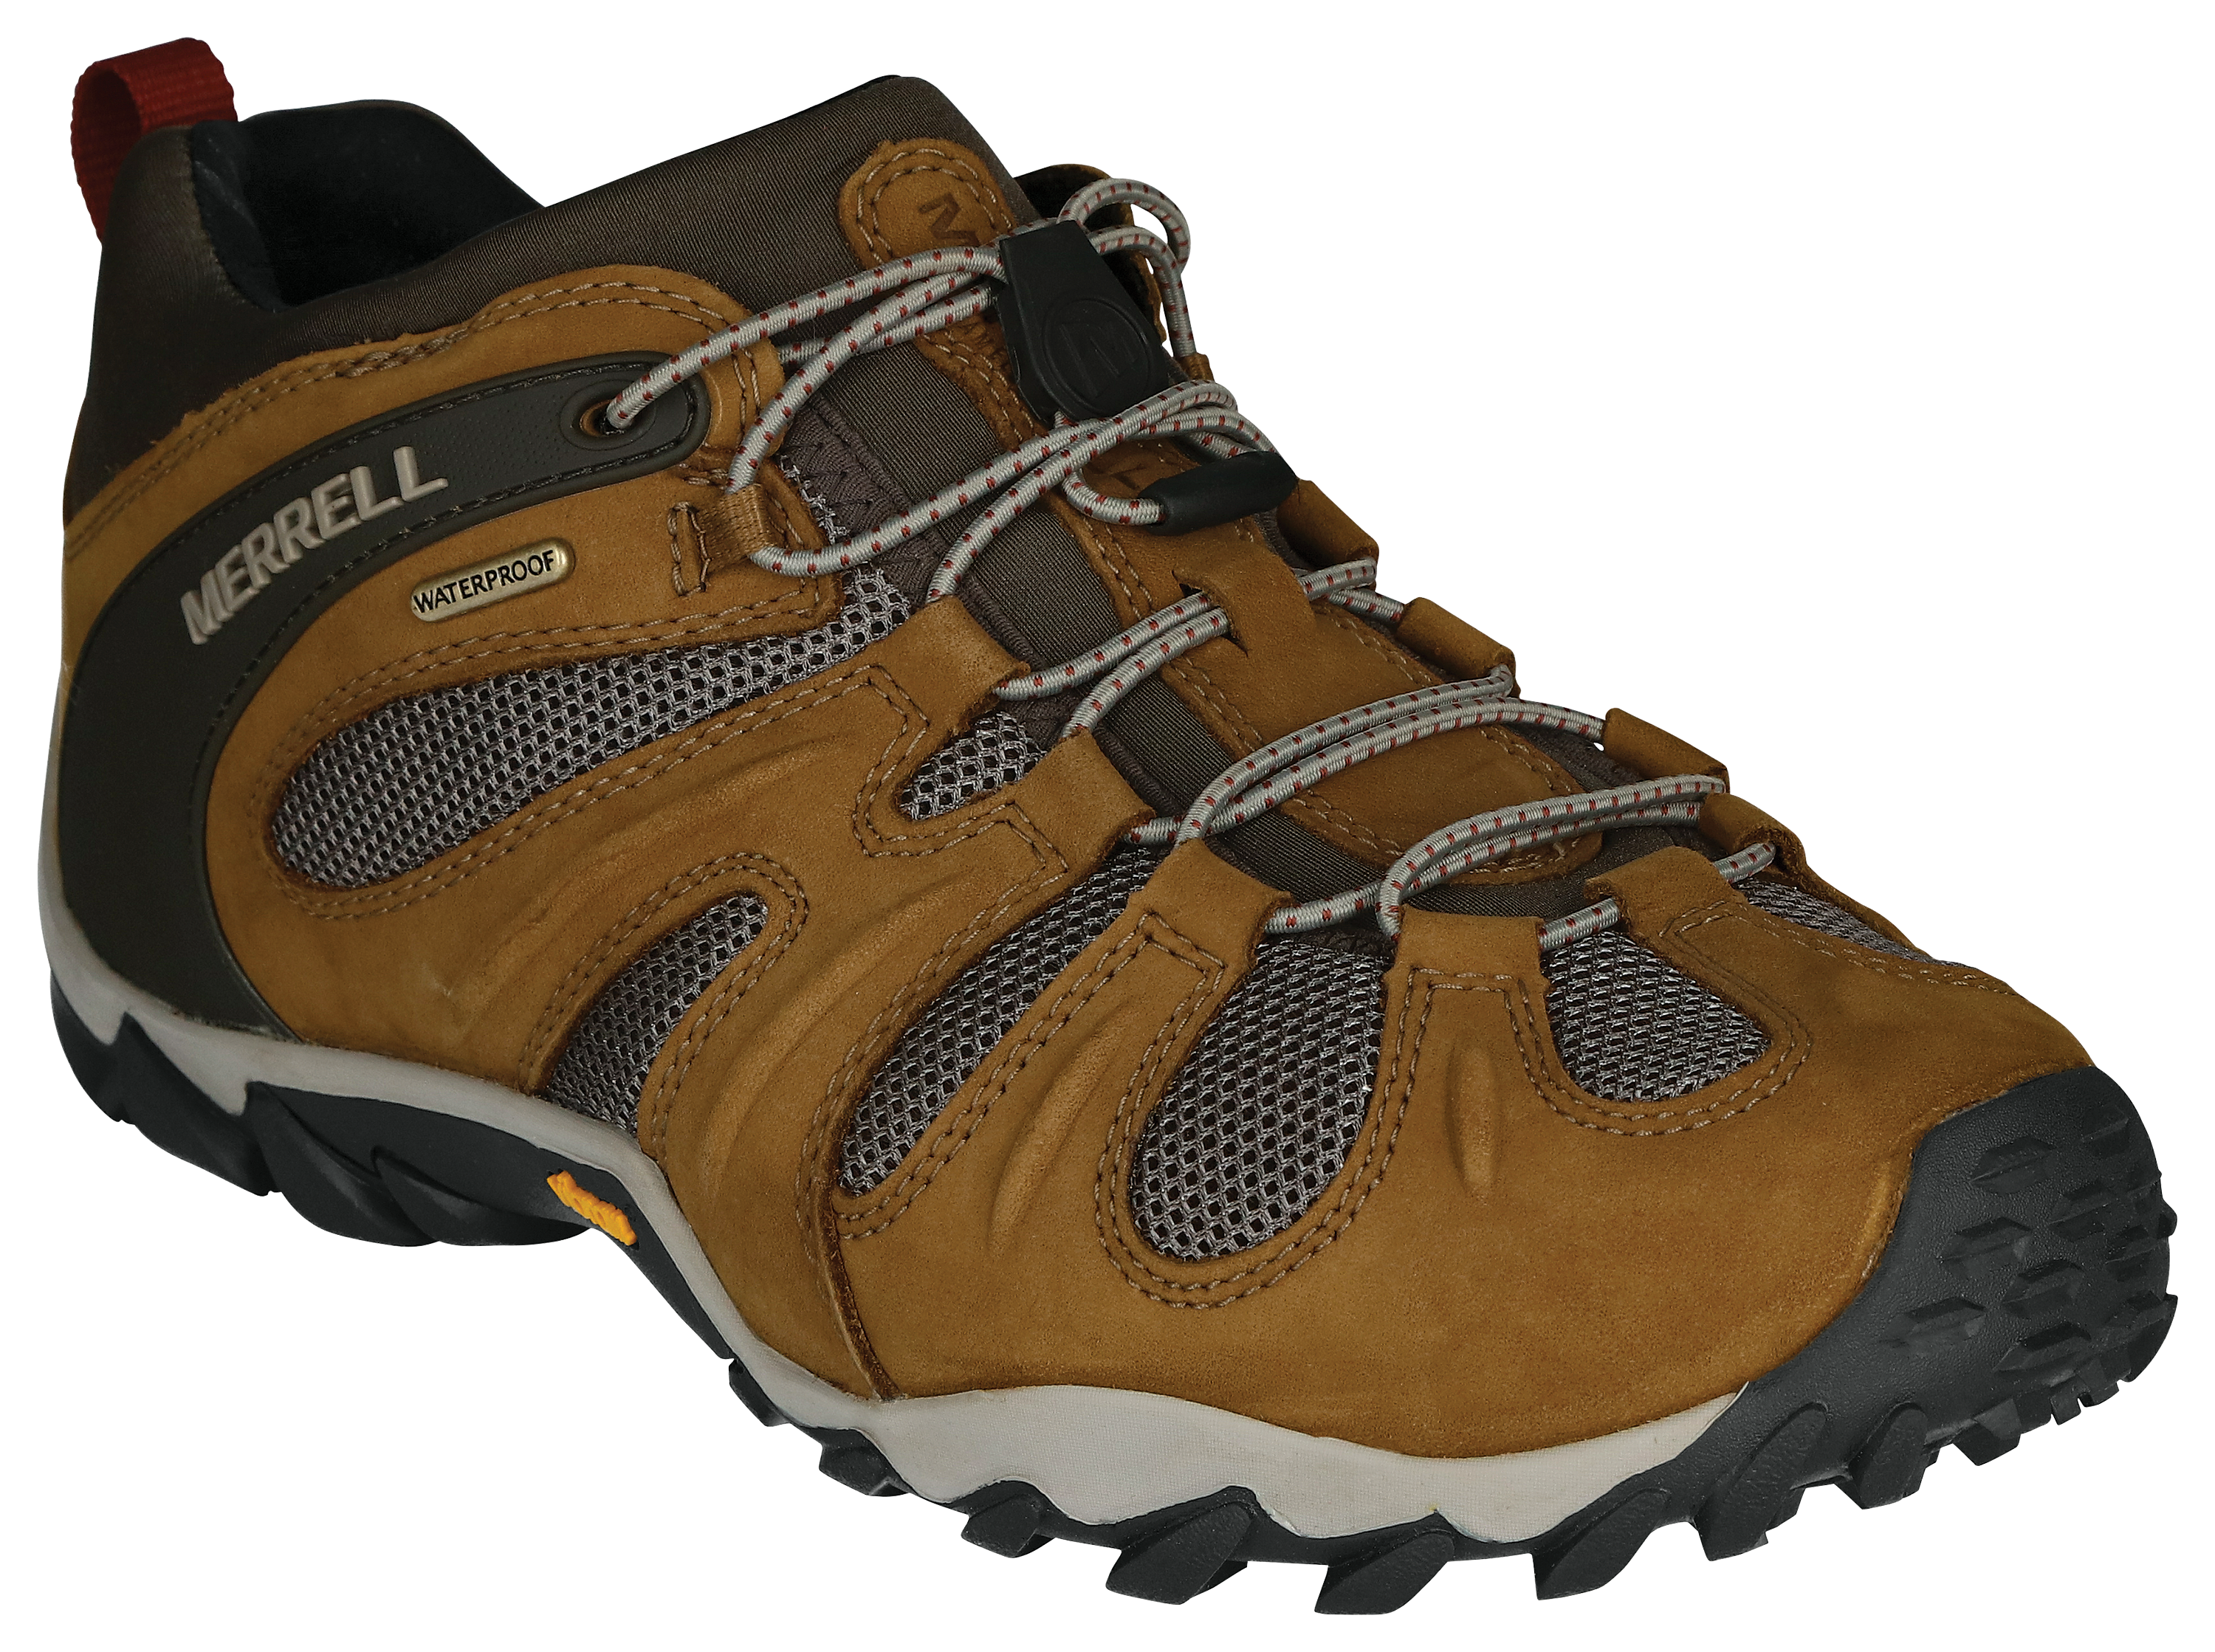 Consignment blast reservation Merrell Chameleon 8 Stretch Waterproof Hiking Boots for Men | Bass Pro Shops